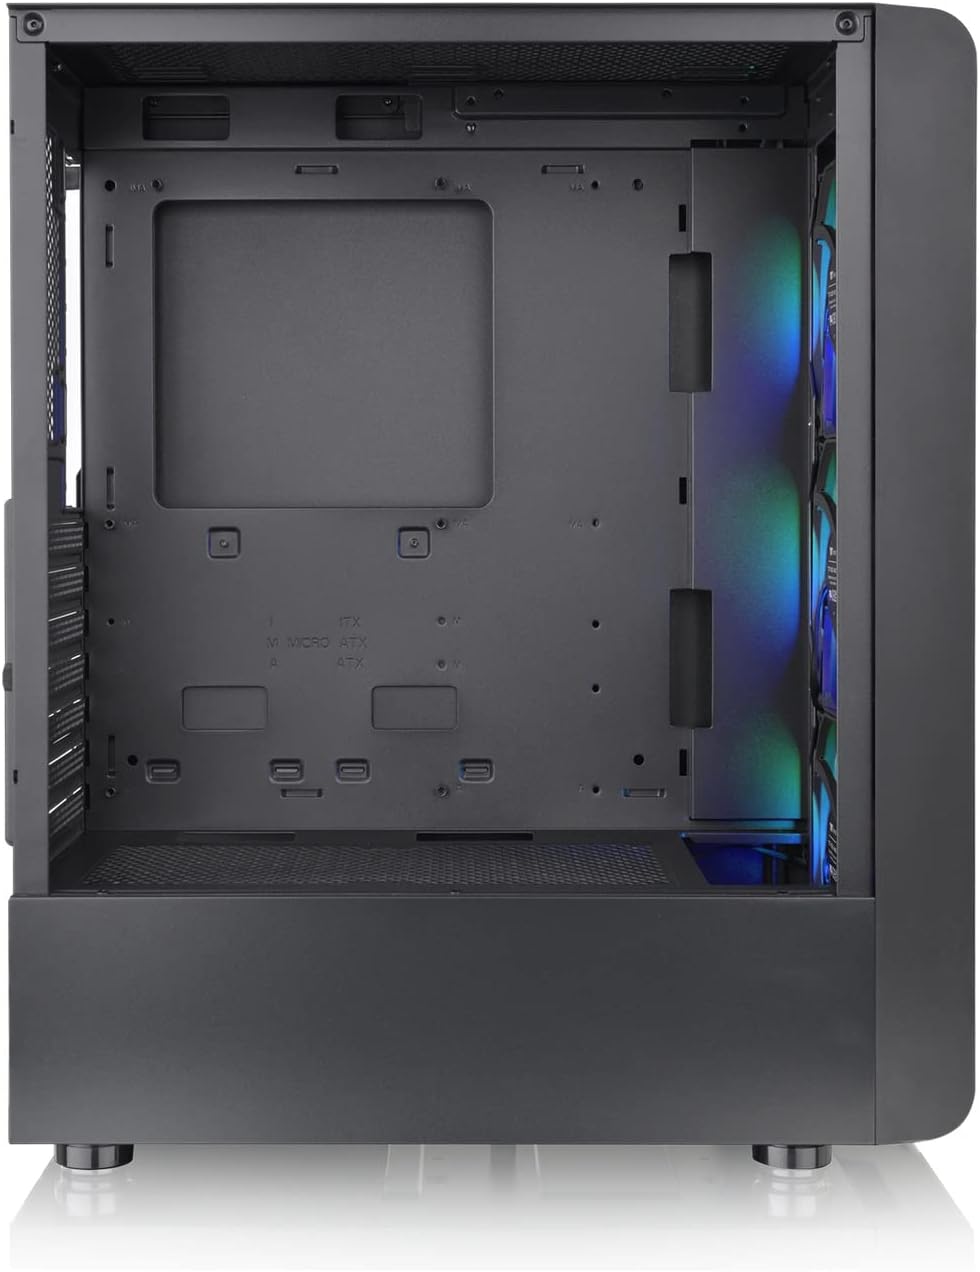 Thermaltake S200 Mesh ARGB Tempered Glass Mid Tower Case Black Edition